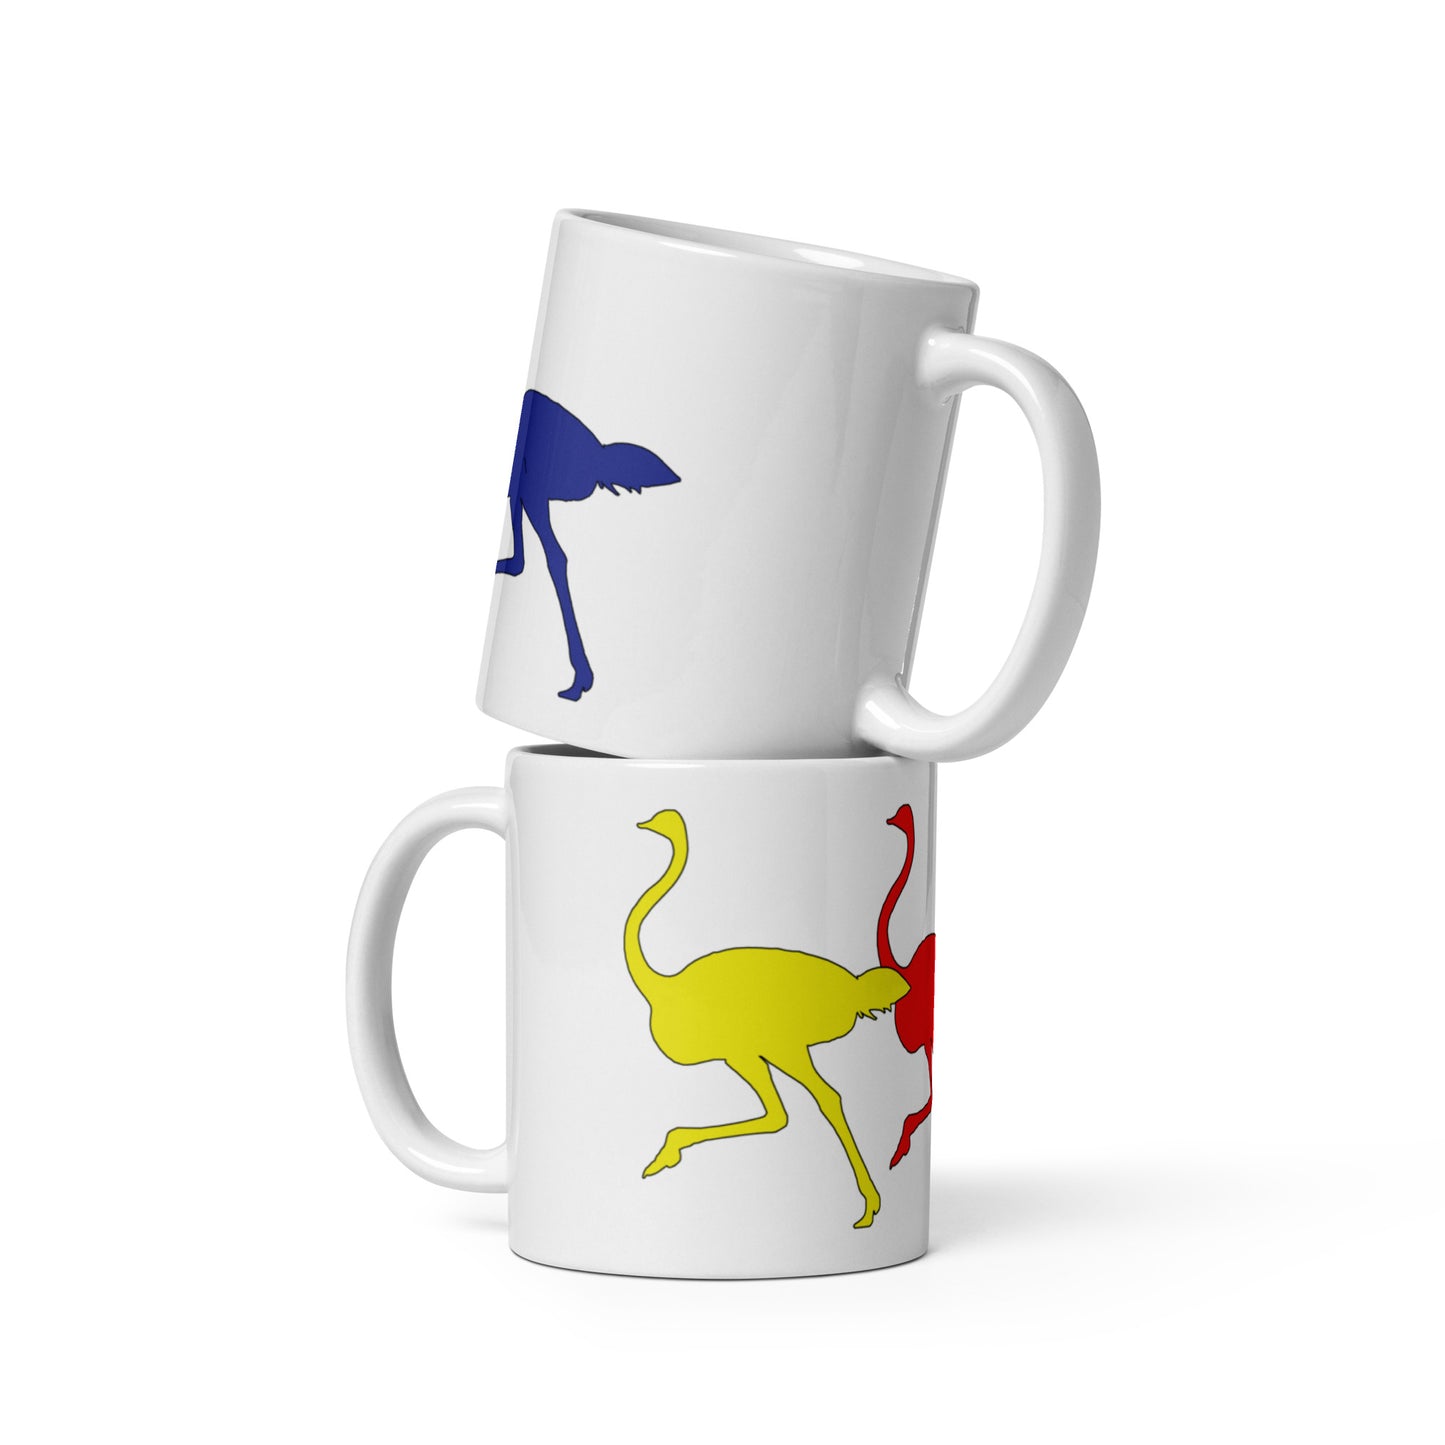 Glossy Mug printed with Colourful Running Ostriches.